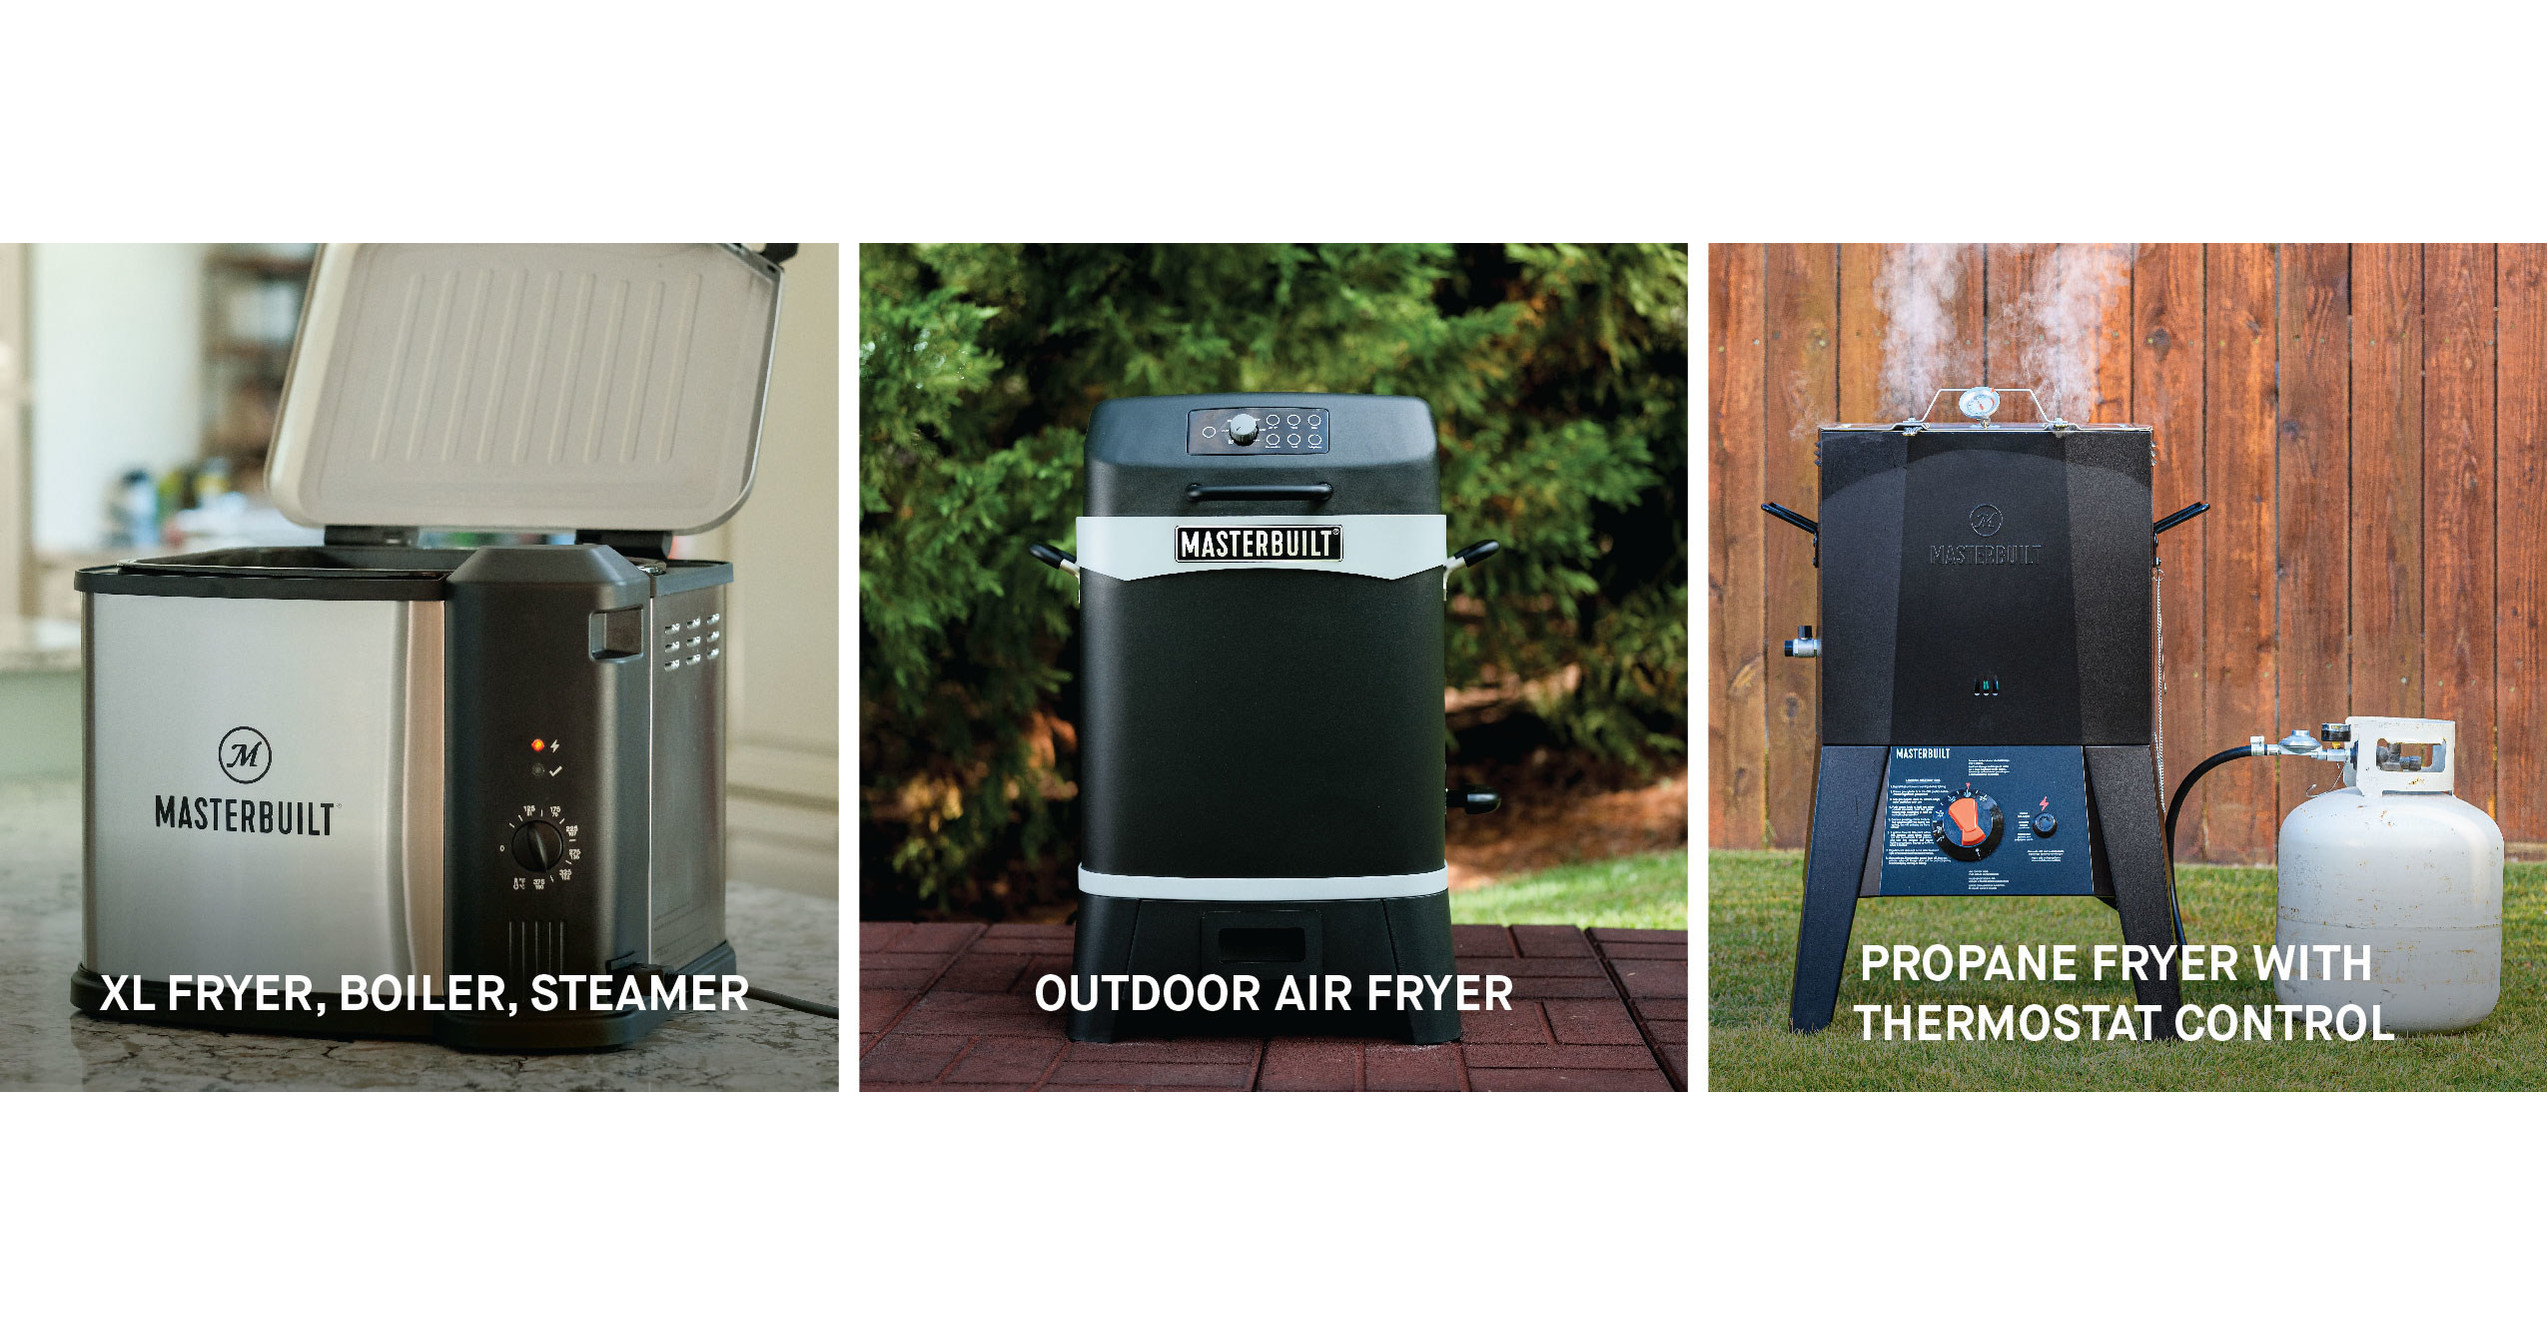 Masterbuilt Launches New Outdoor Air Fryer - CookOut News